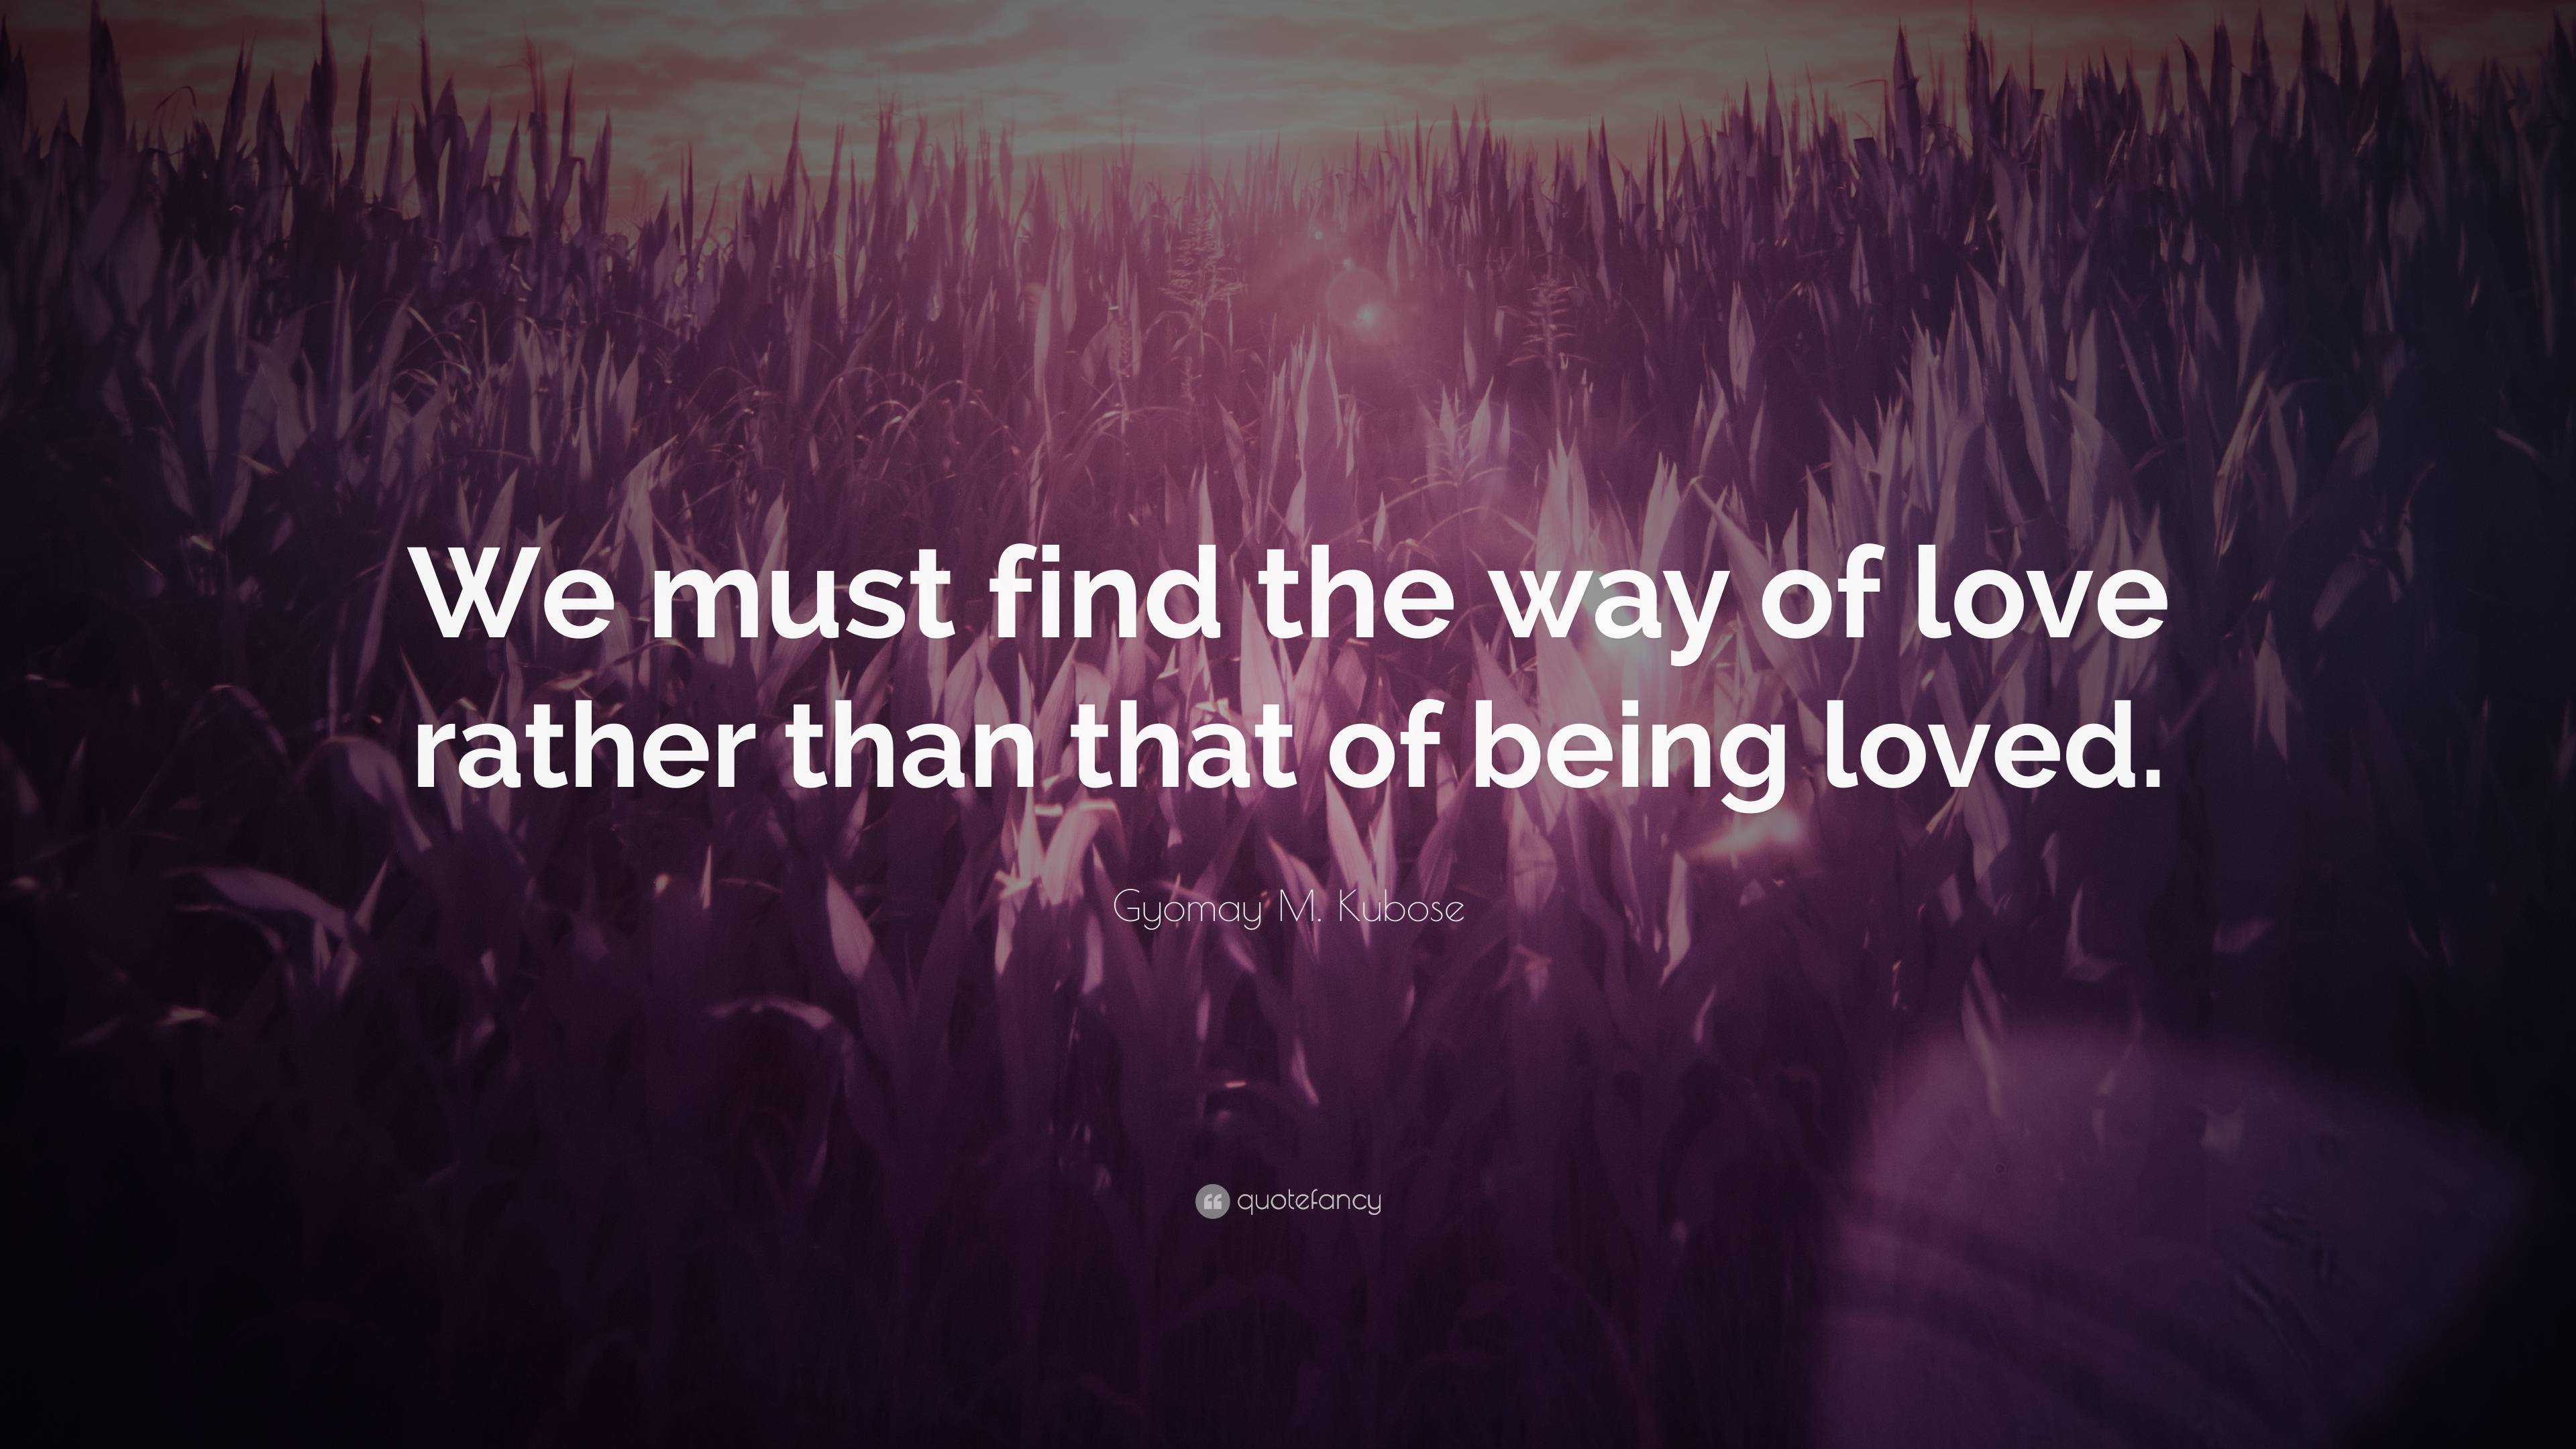 Gyomay M. Kubose Quote: “We must find the way of love rather than that ...